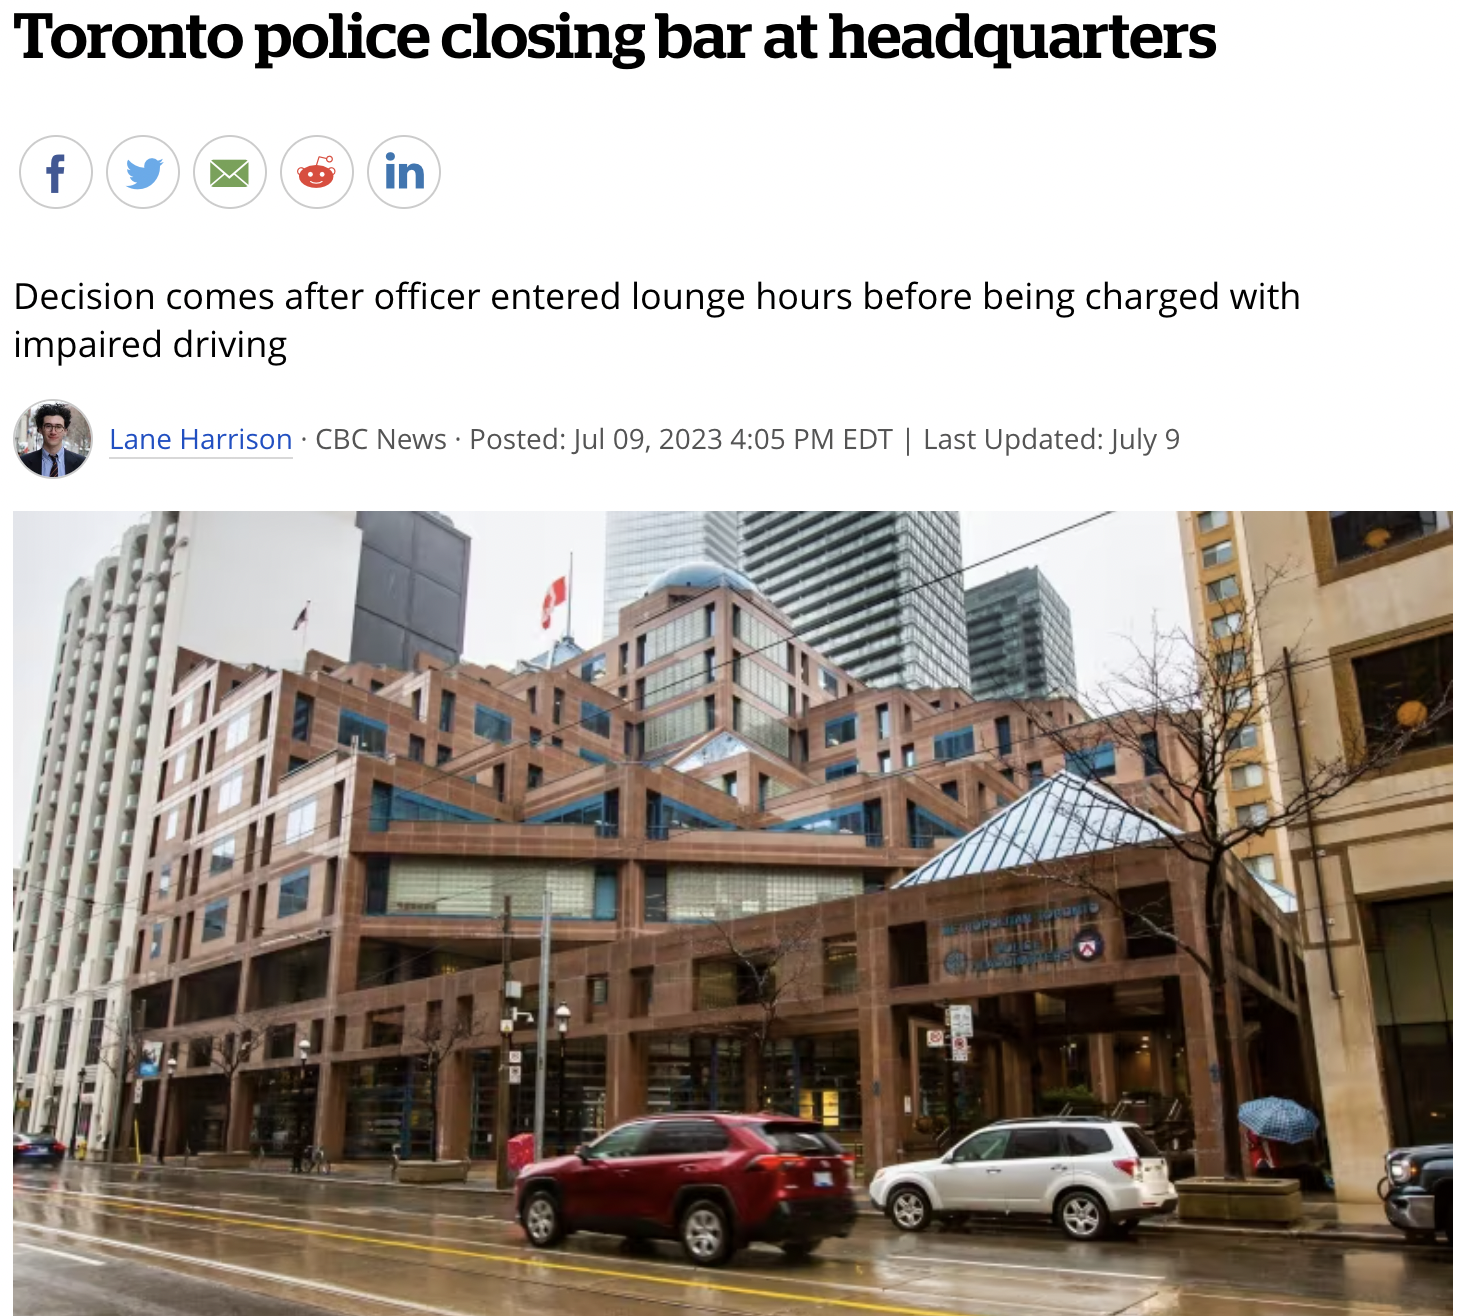 tim hortons - Toronto police closing bar at headquarters f in Decision comes after officer entered lounge hours before being charged with impaired driving Lane Harrison Cbc News Posted Edt | Last Updated July 9 Laws